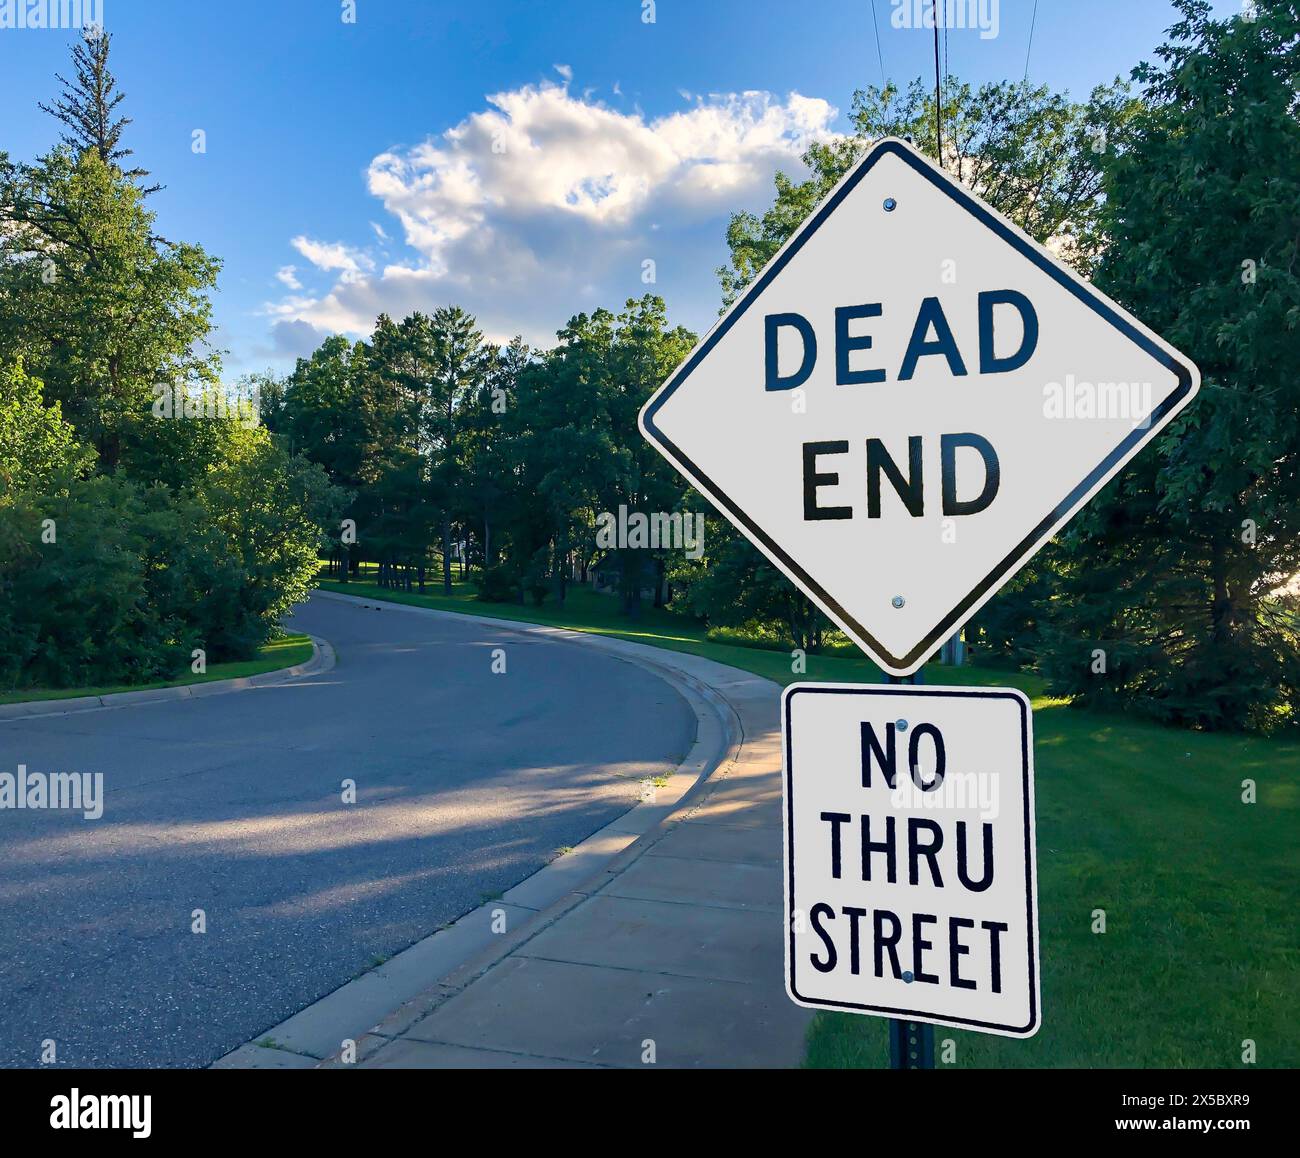 White Warning Road Signs on DEAD END street and NO THRU STREET along road and sidewalk in evening. Stock Photo